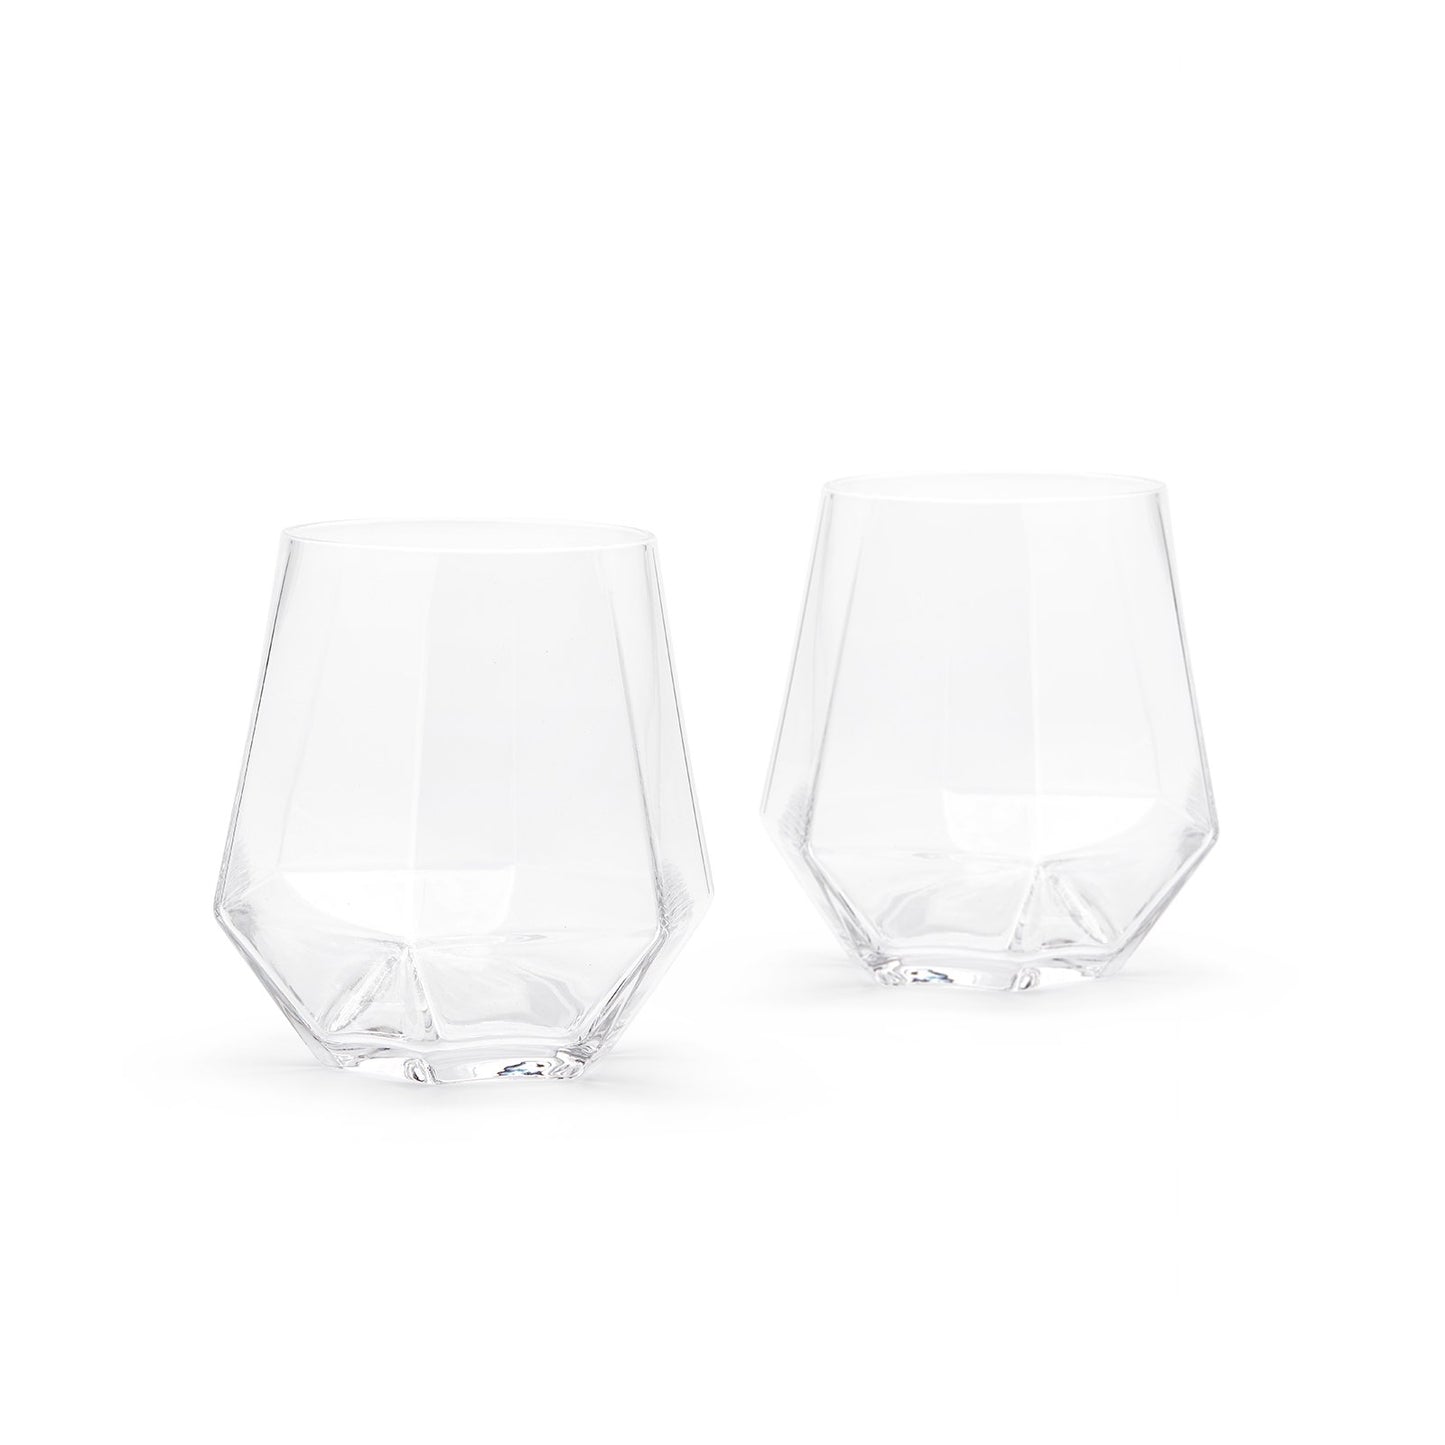 Everyday Diamond Shaped Crystal Glass by Puik - Set of 2